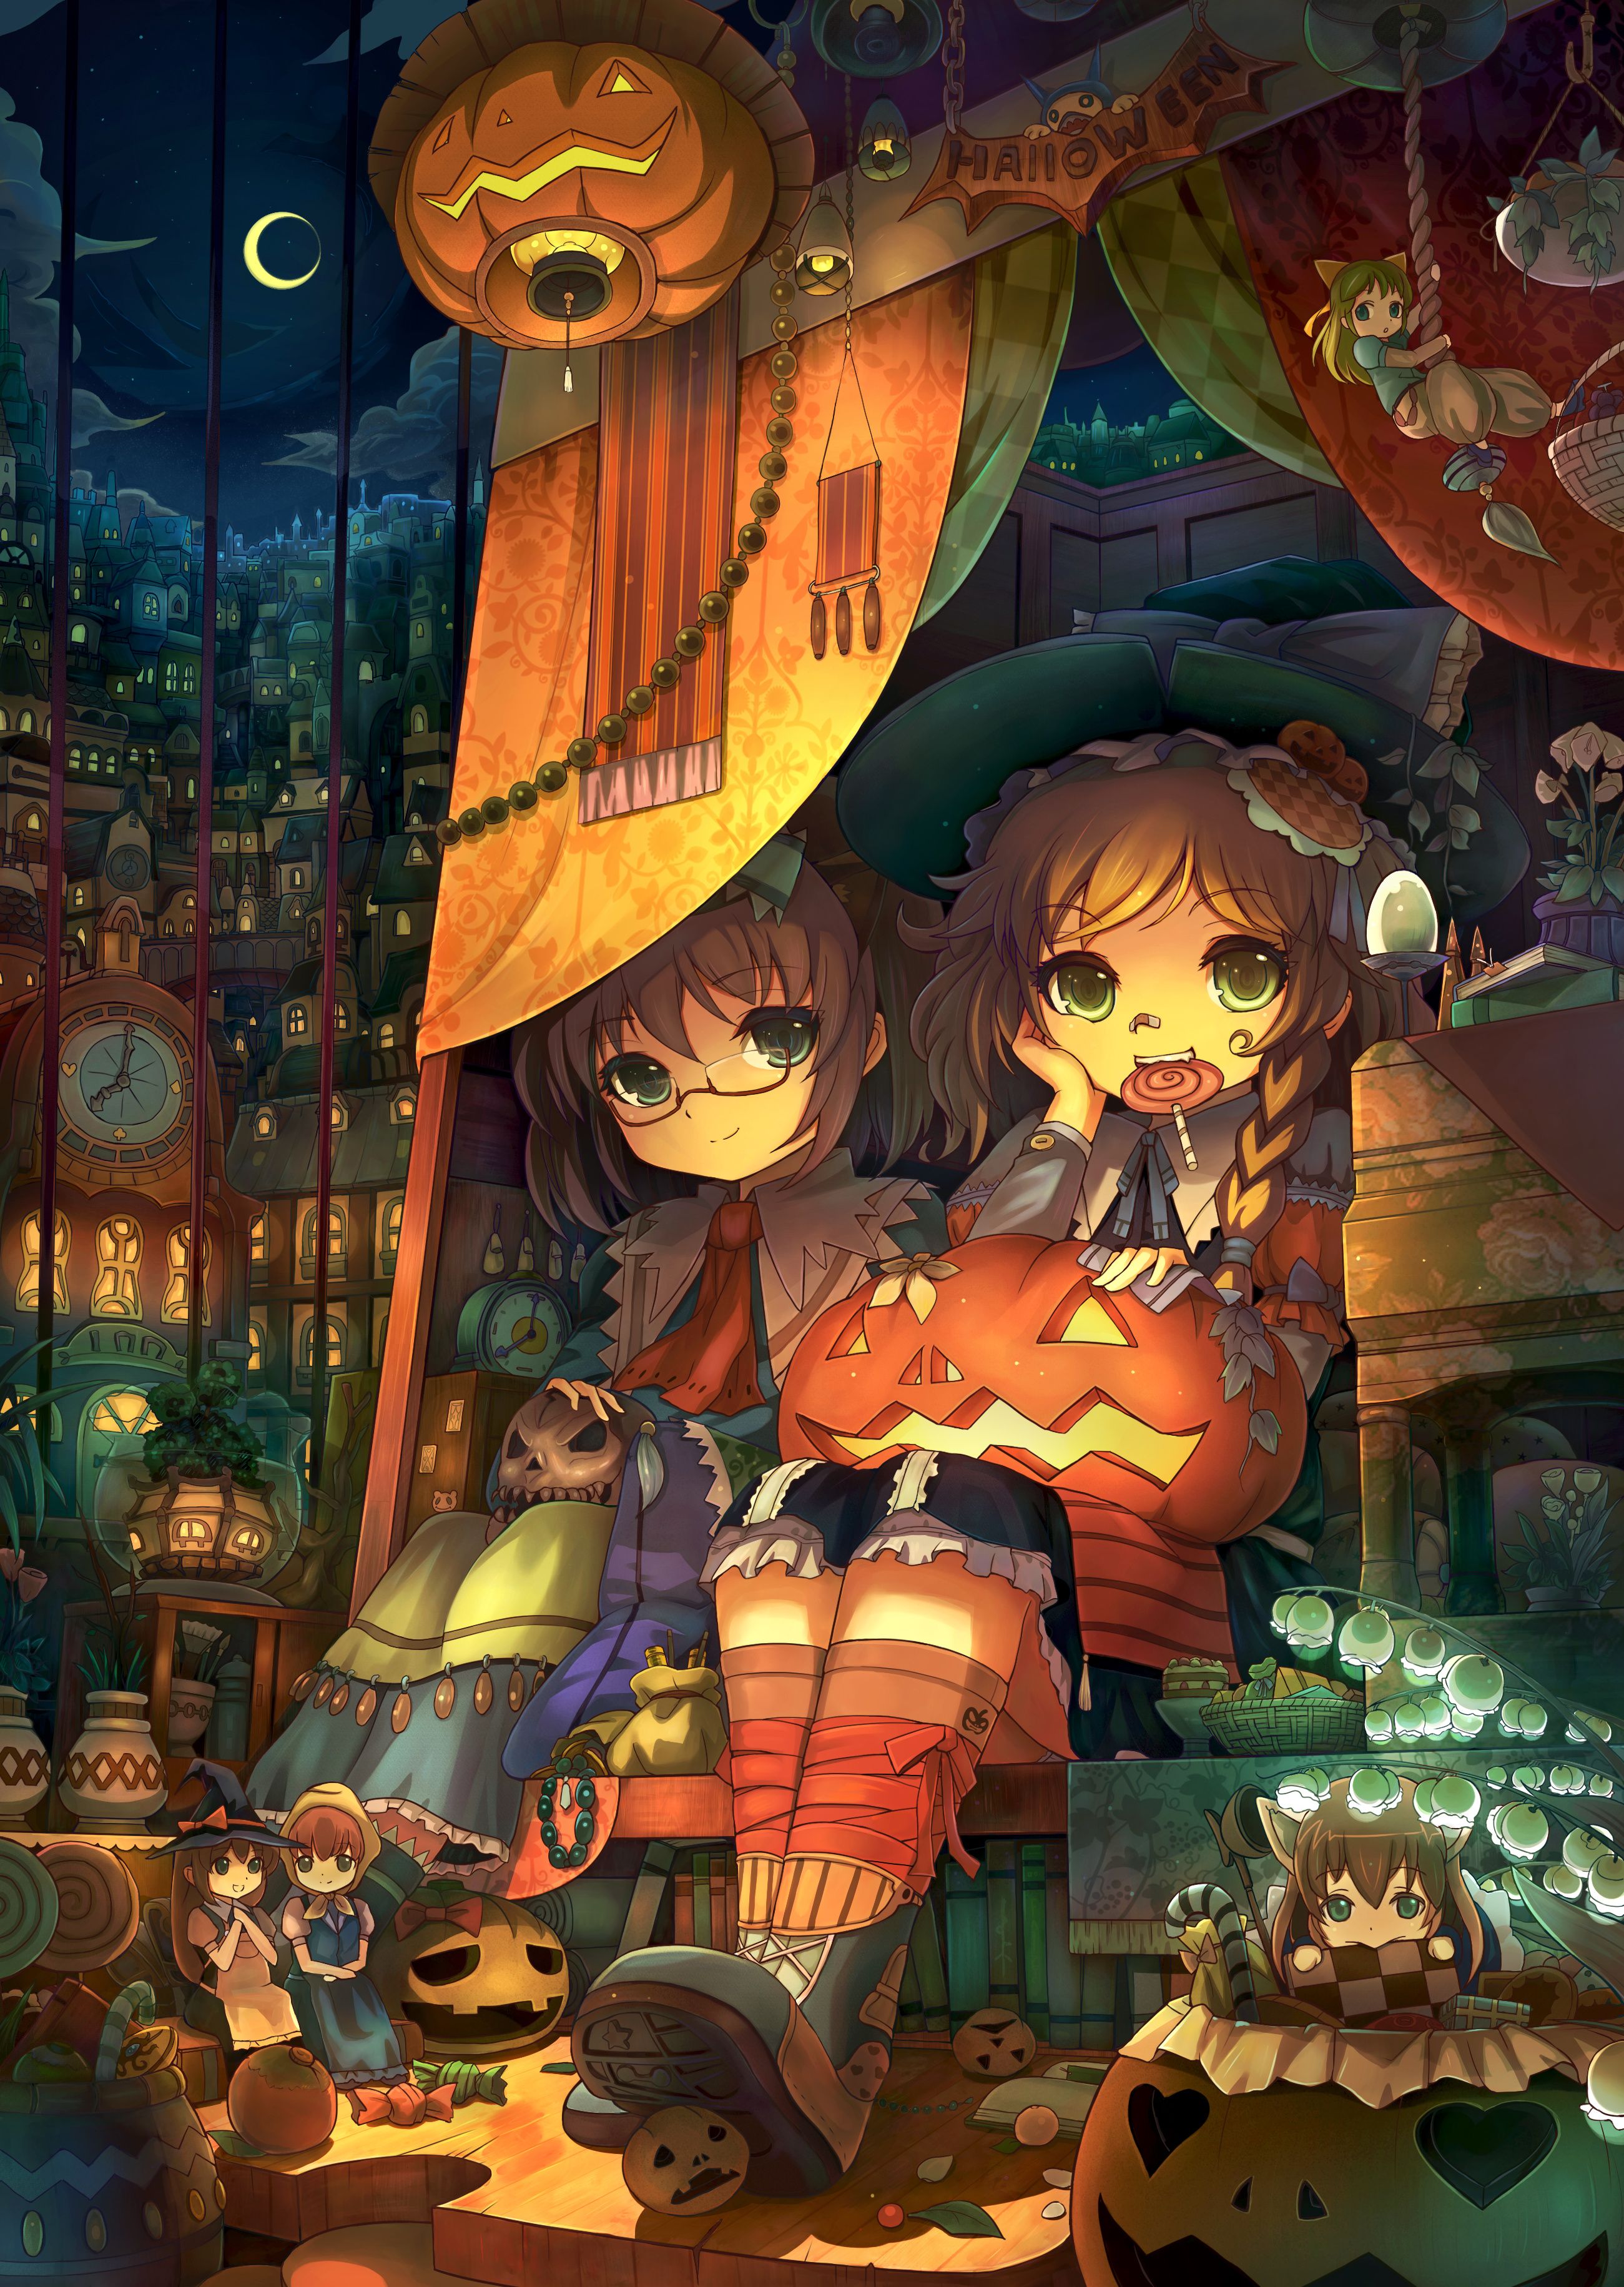 Wallpaper the sky night holiday the moon hat anime art candy  skeleton girl pumpkin witch broom halloween huazha01 images for  desktop section сёдзё  download